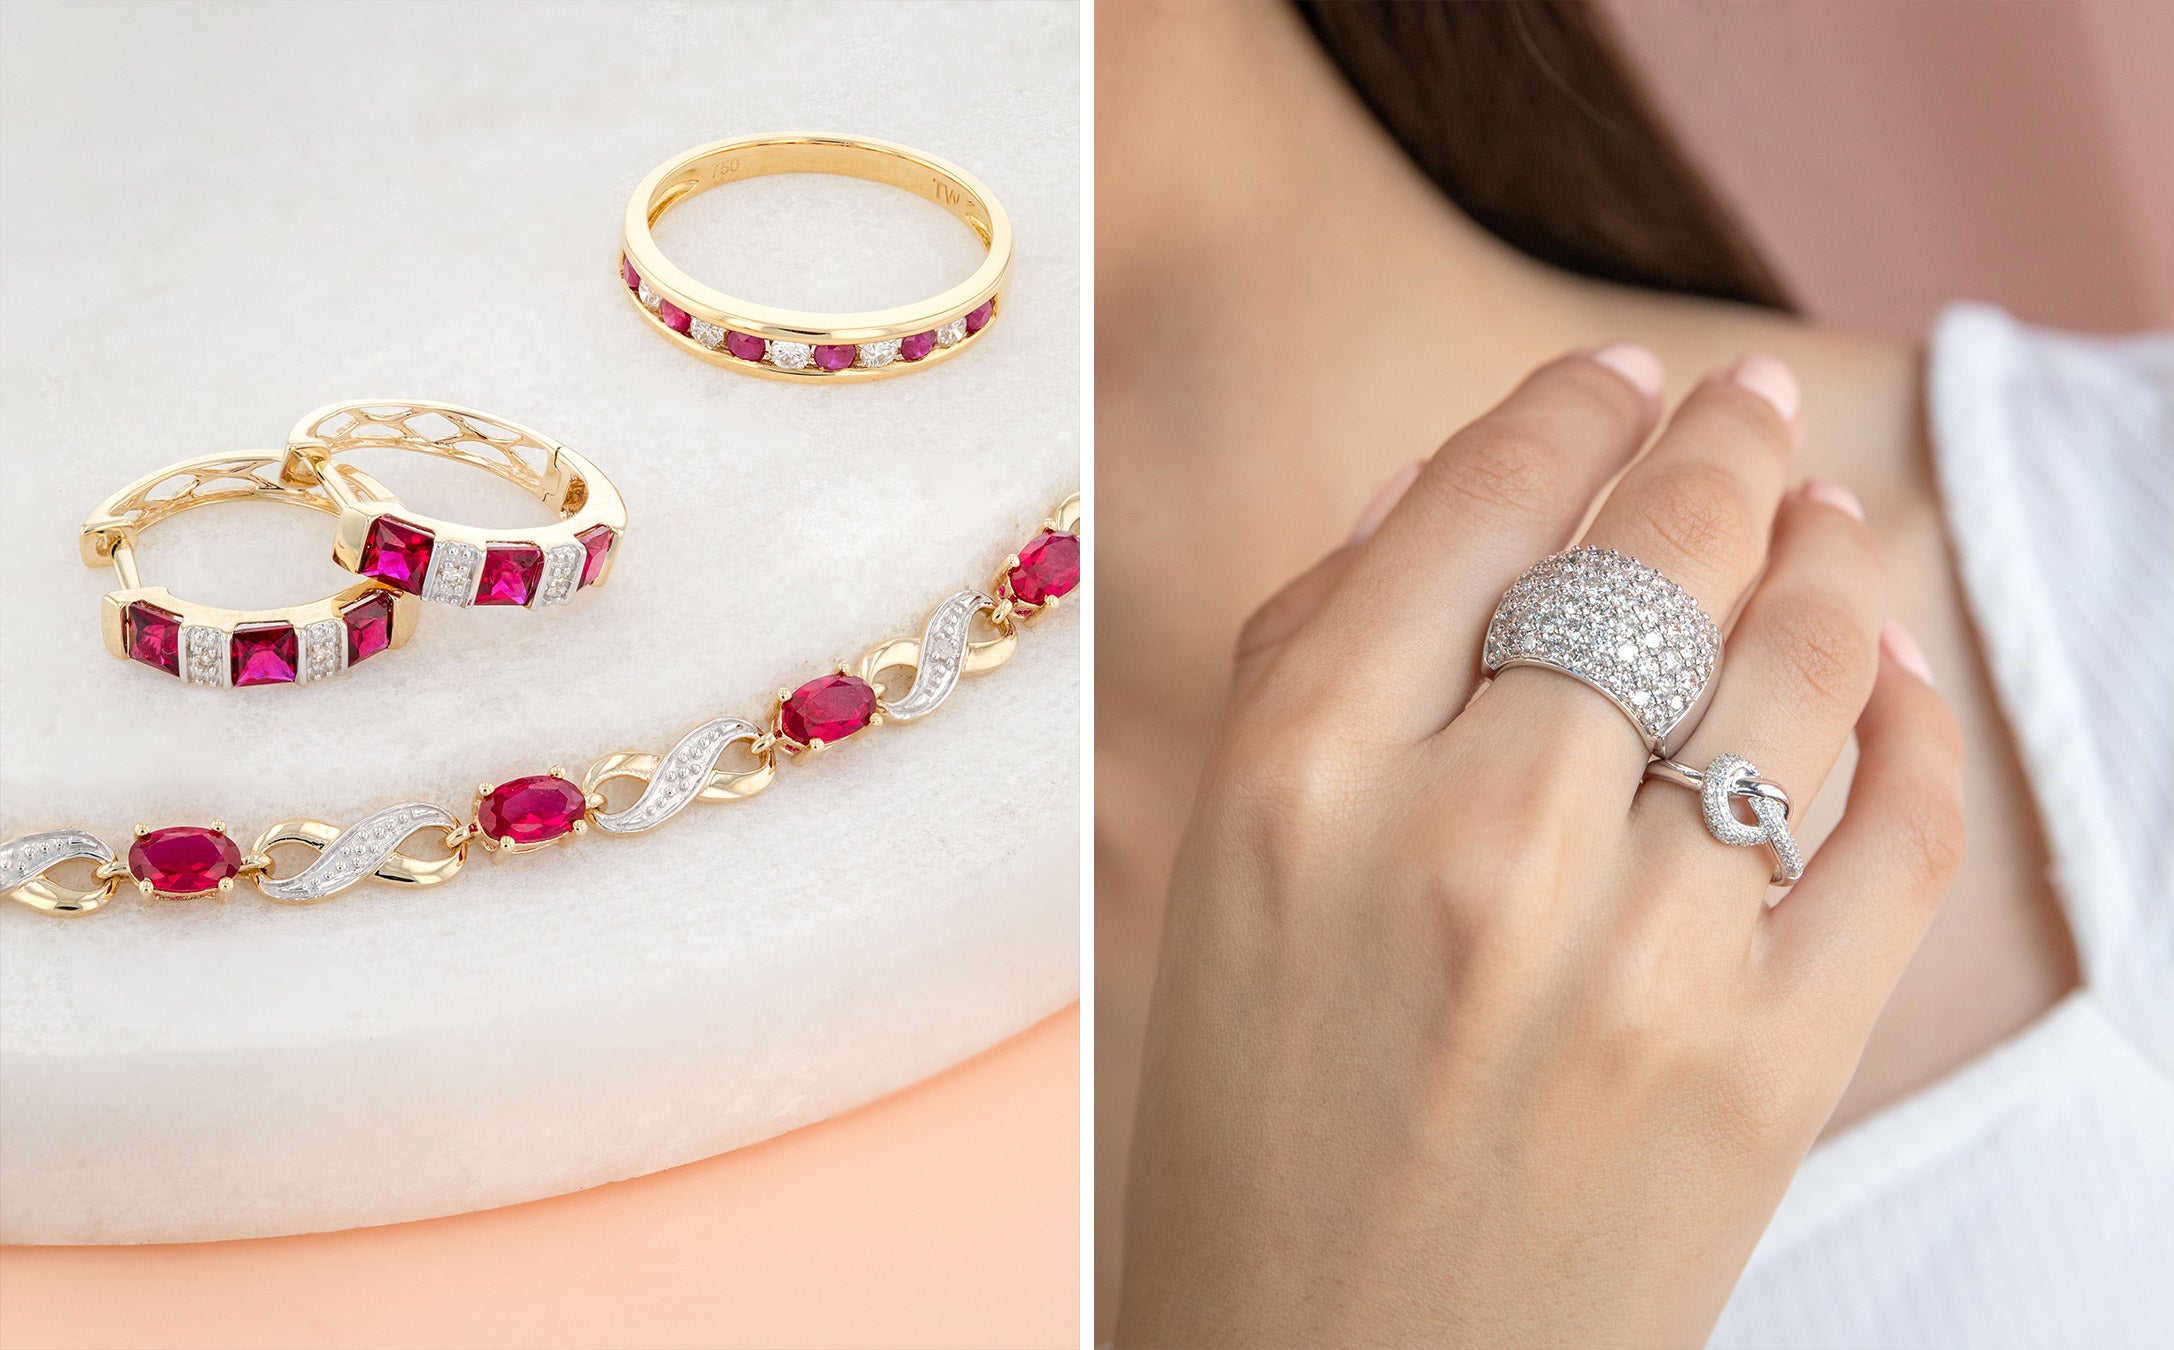 how to wear multiple diamond rings: wear different sizes